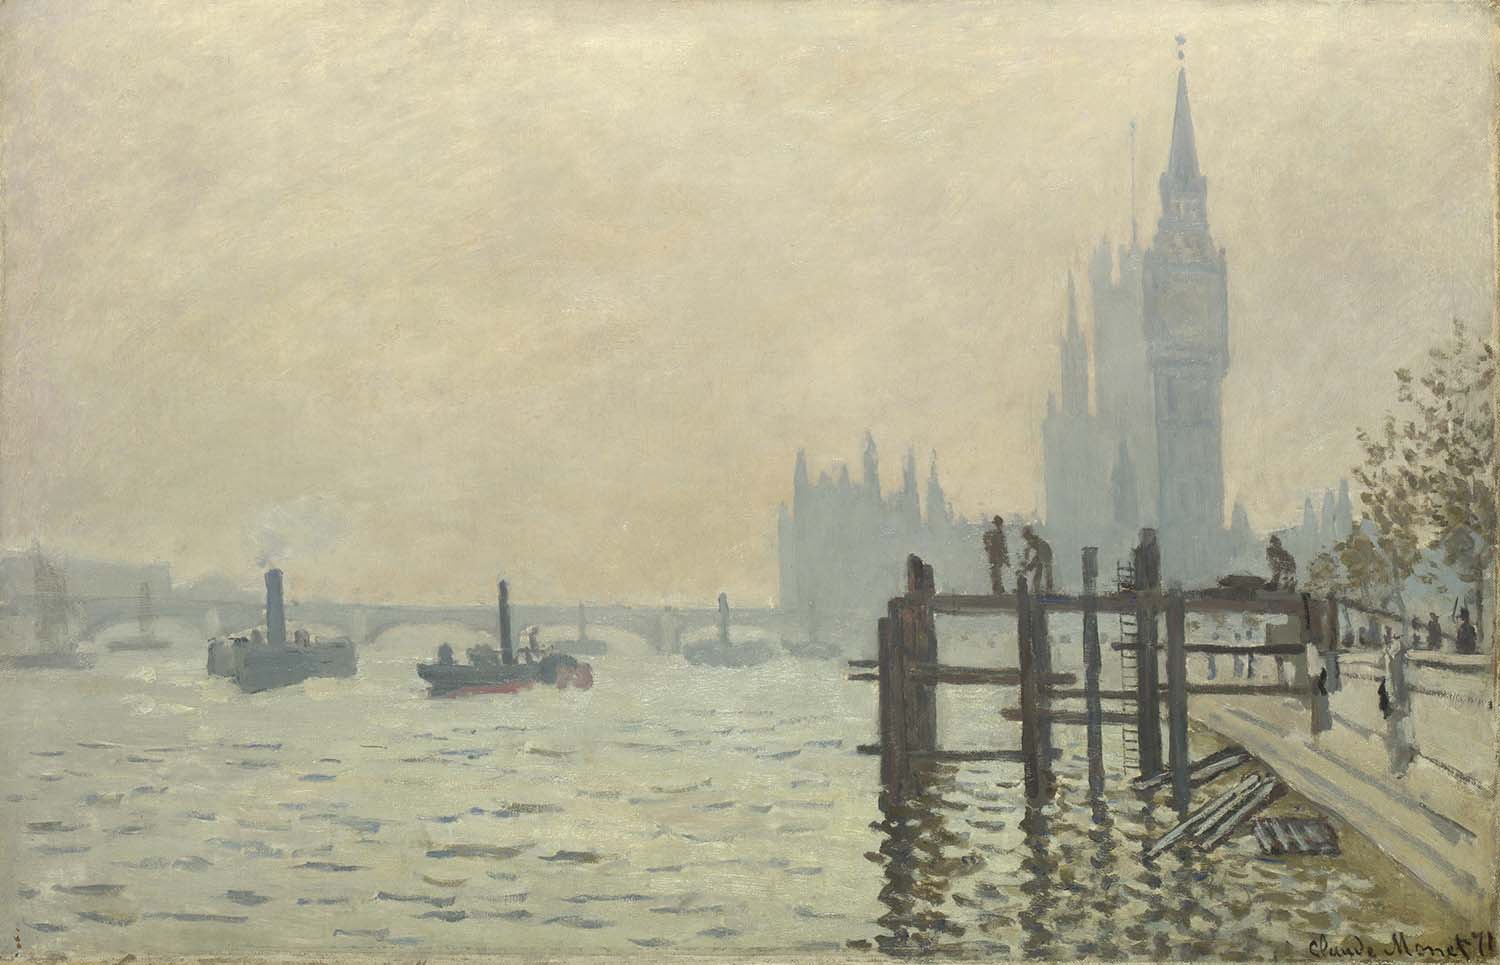 150 Years of Painting the Thames